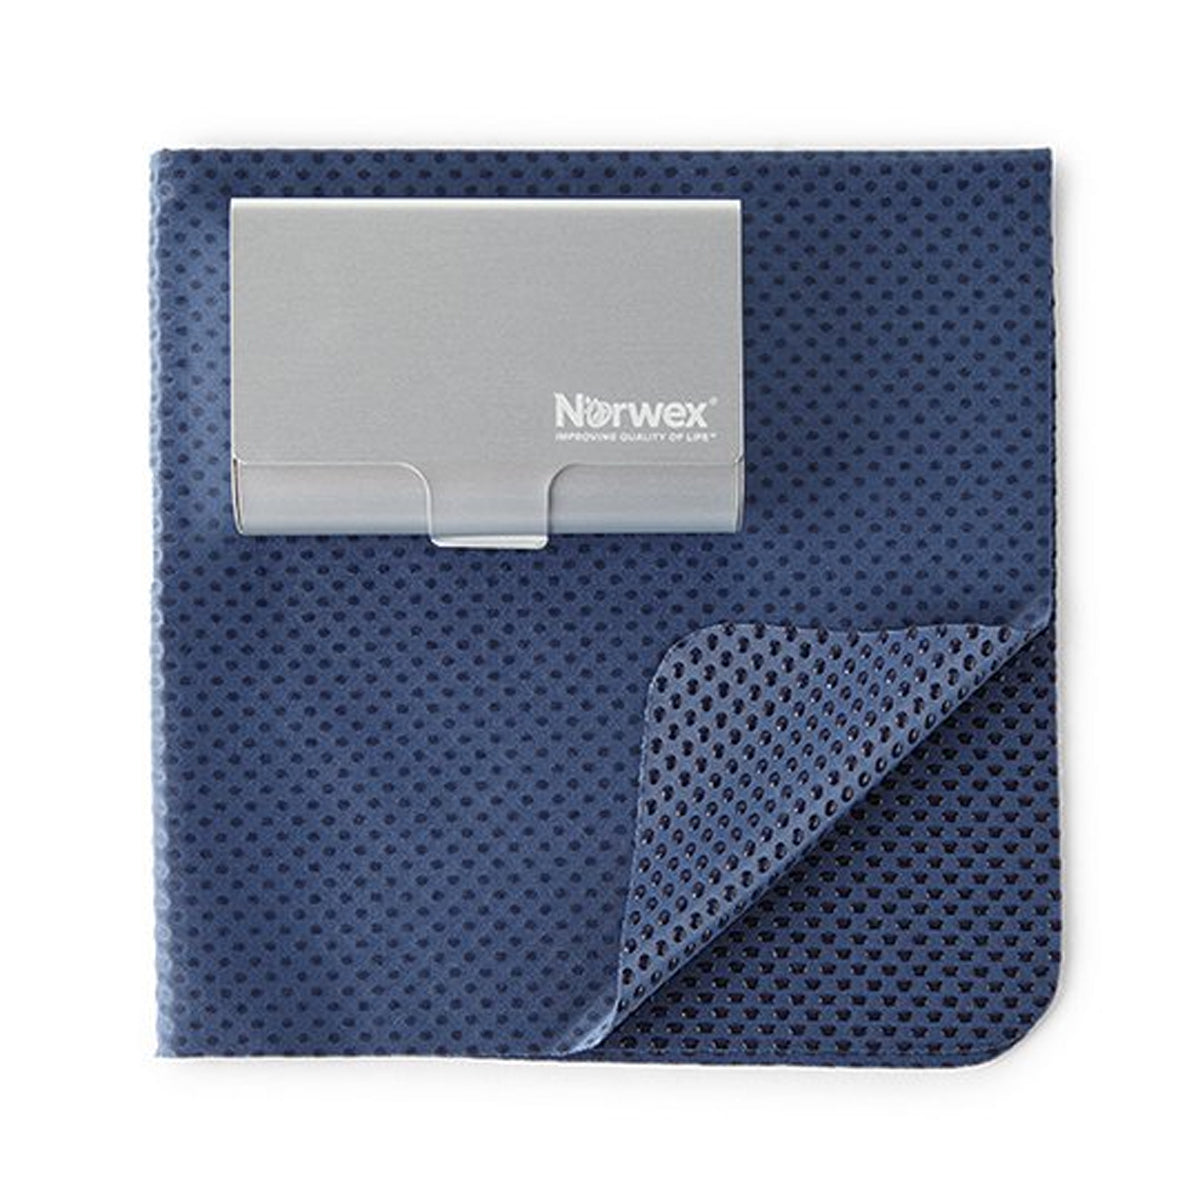 Tech Cleaning Cloth and Case, Norwex